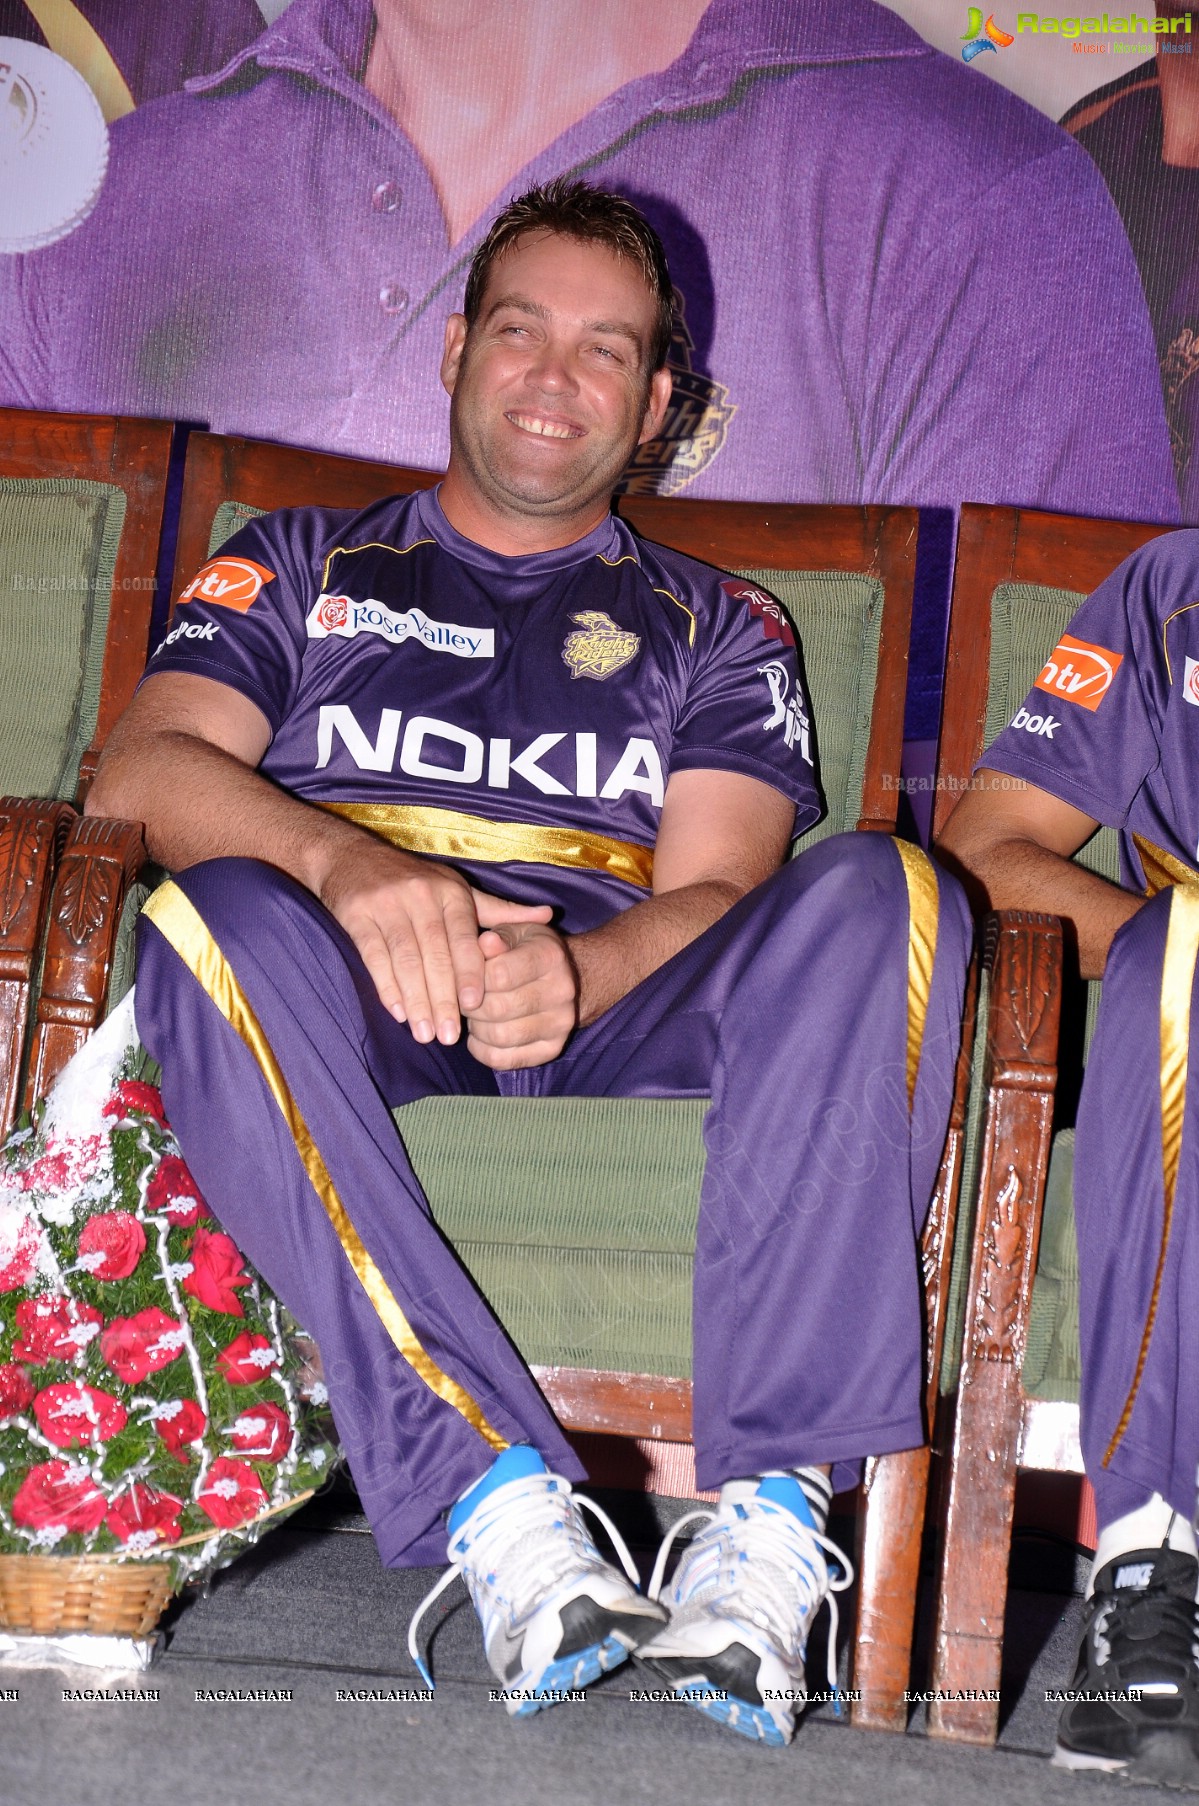 Dish TV organizes an unforgettable evening with Kolkata Knight Riders 